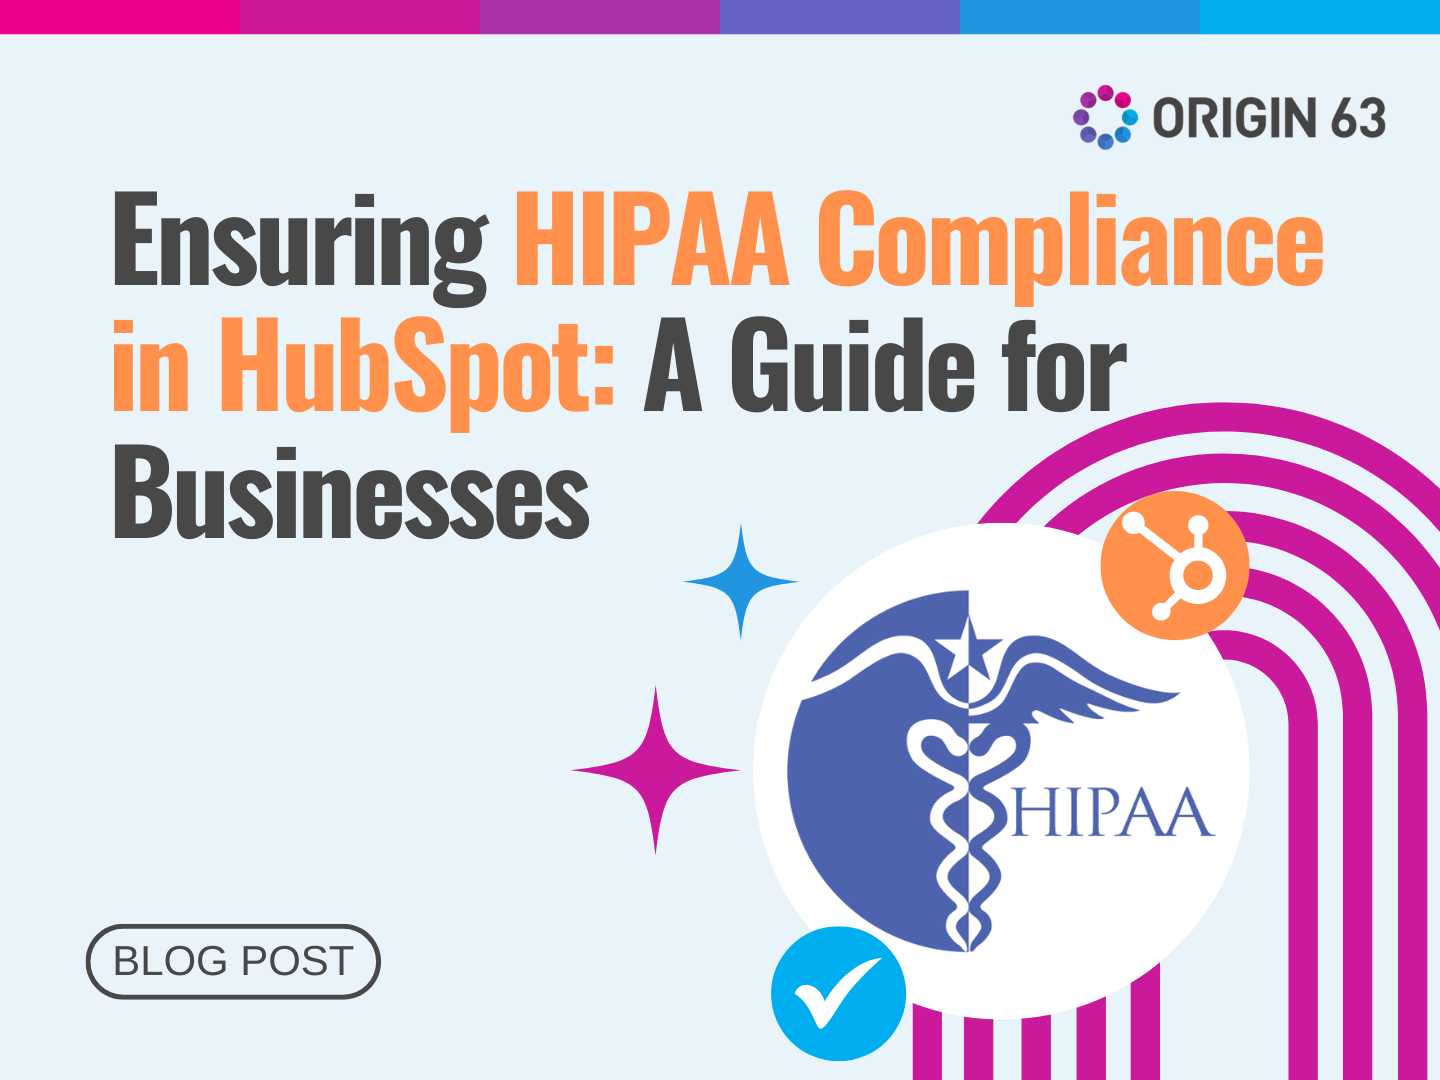 Secure Patient Data in HubSpot! Learn how HIPAA compliance builds trust & avoids hefty fines for healthcare businesses.